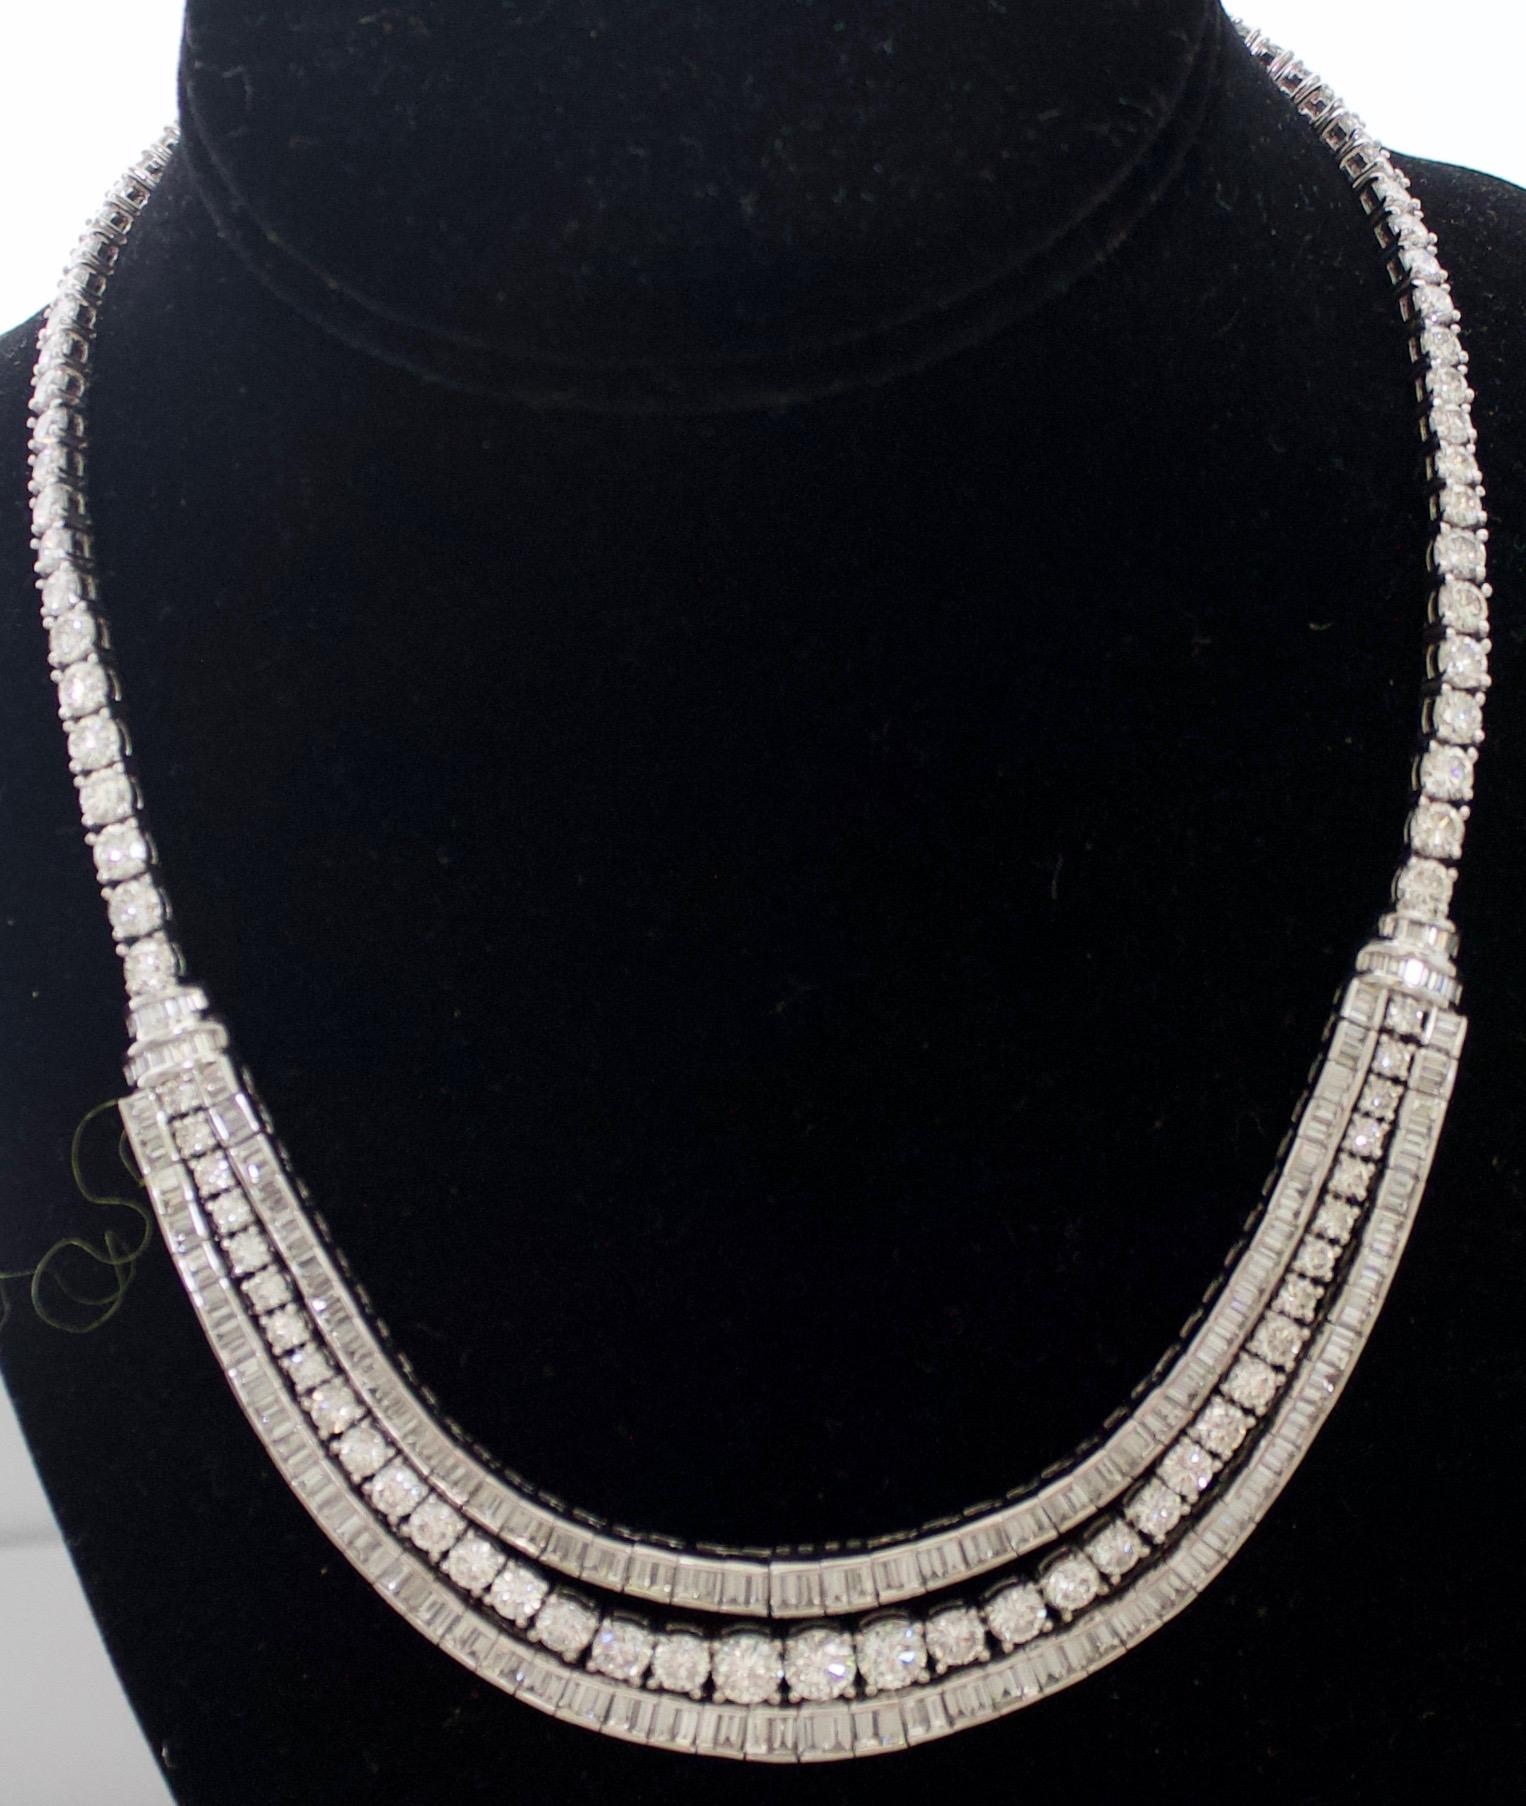 Seriously  Important Platinum and Diamond Necklace 45.00 Carats.
Introducing the Lady's Platinum Diamond Necklace, a stunning piece of jewelry that exudes elegance and luxury. Crafted from premium platinum, this necklace boasts a total diamond